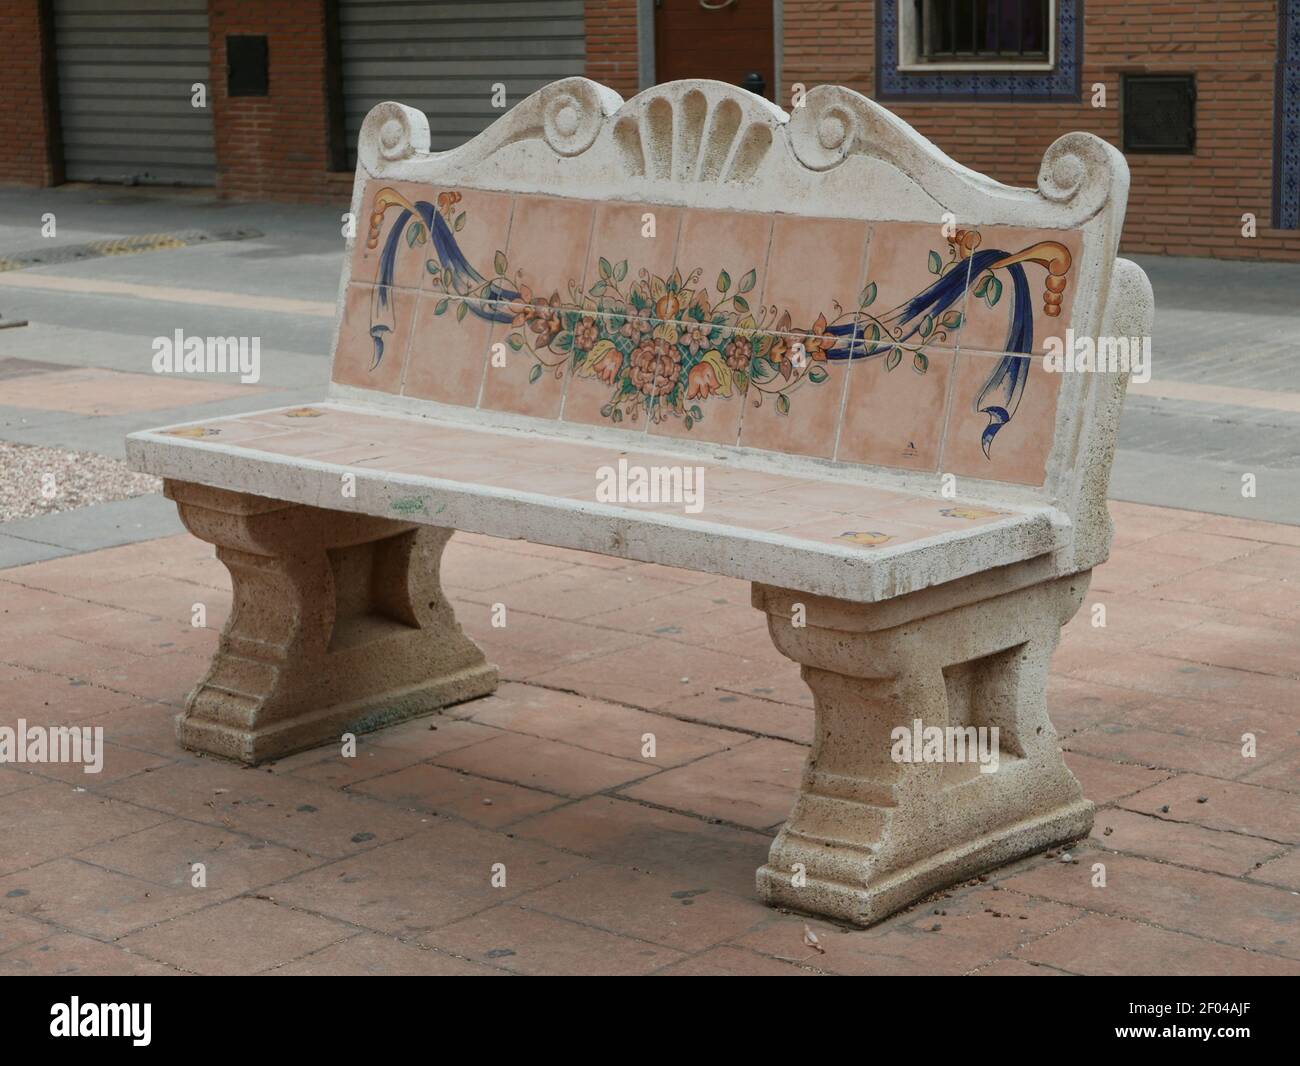 A bench with a drawing on the back in the middle of the city Stock Photo